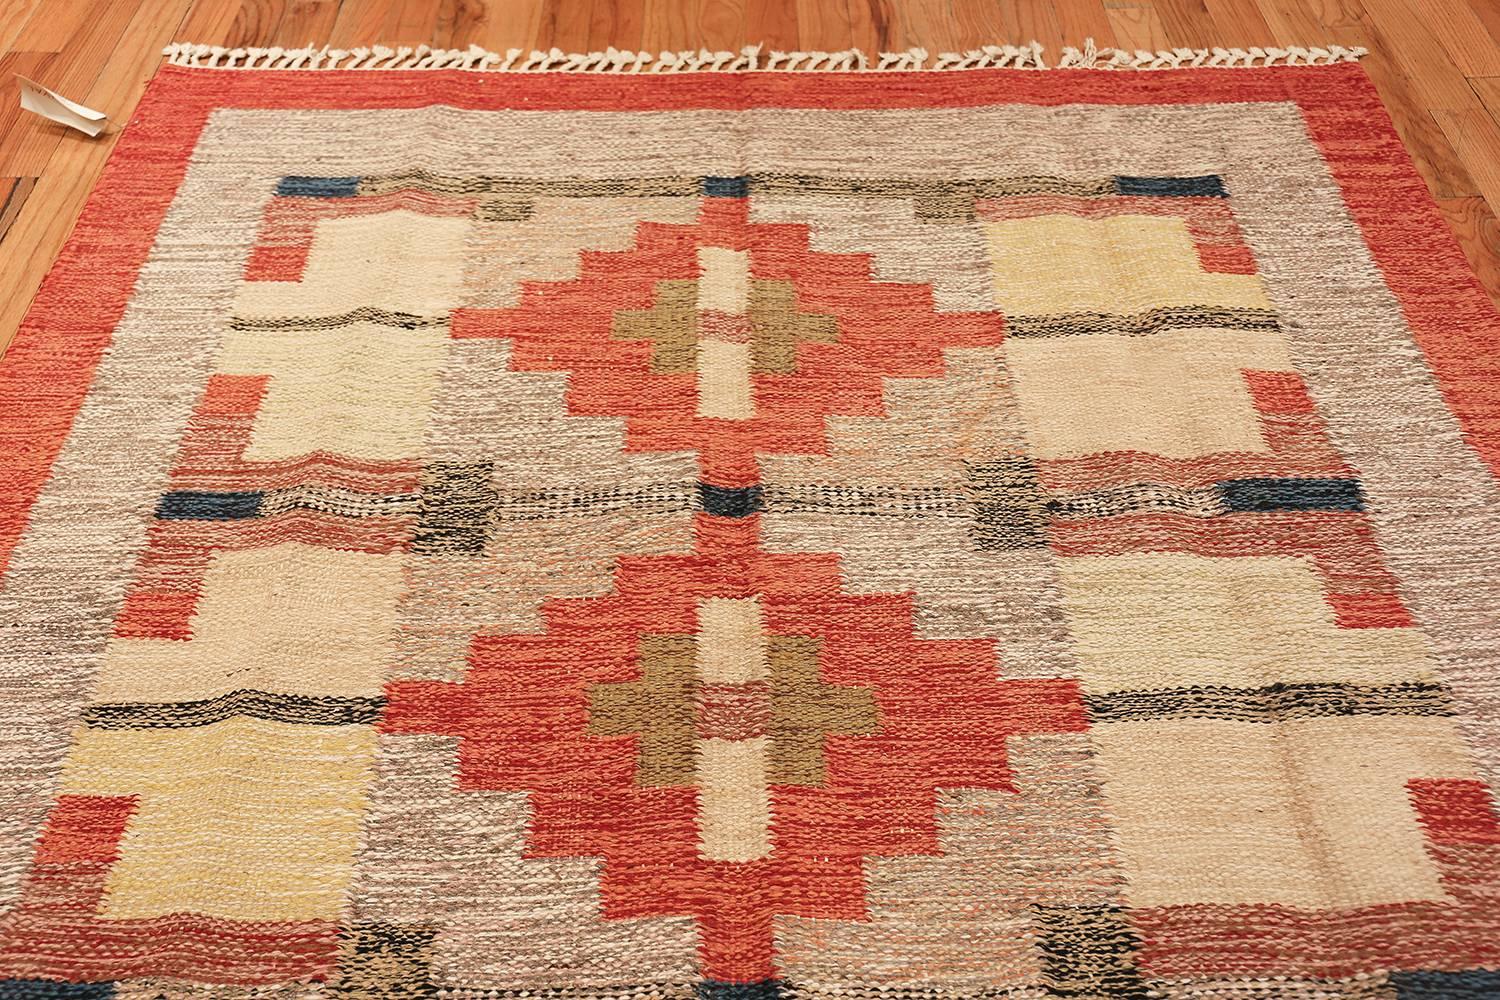 Vintage Scandinavian Swedish Kilim, Country of Origin: Sweden, Circa Date: Mid 20th Century. Size: 6 ft x 9 ft 9 in (1.83 m x 2.97 m)

Simple, blocked shapes set the tone throughout this attractive kilim, keeping with the elegantly understated